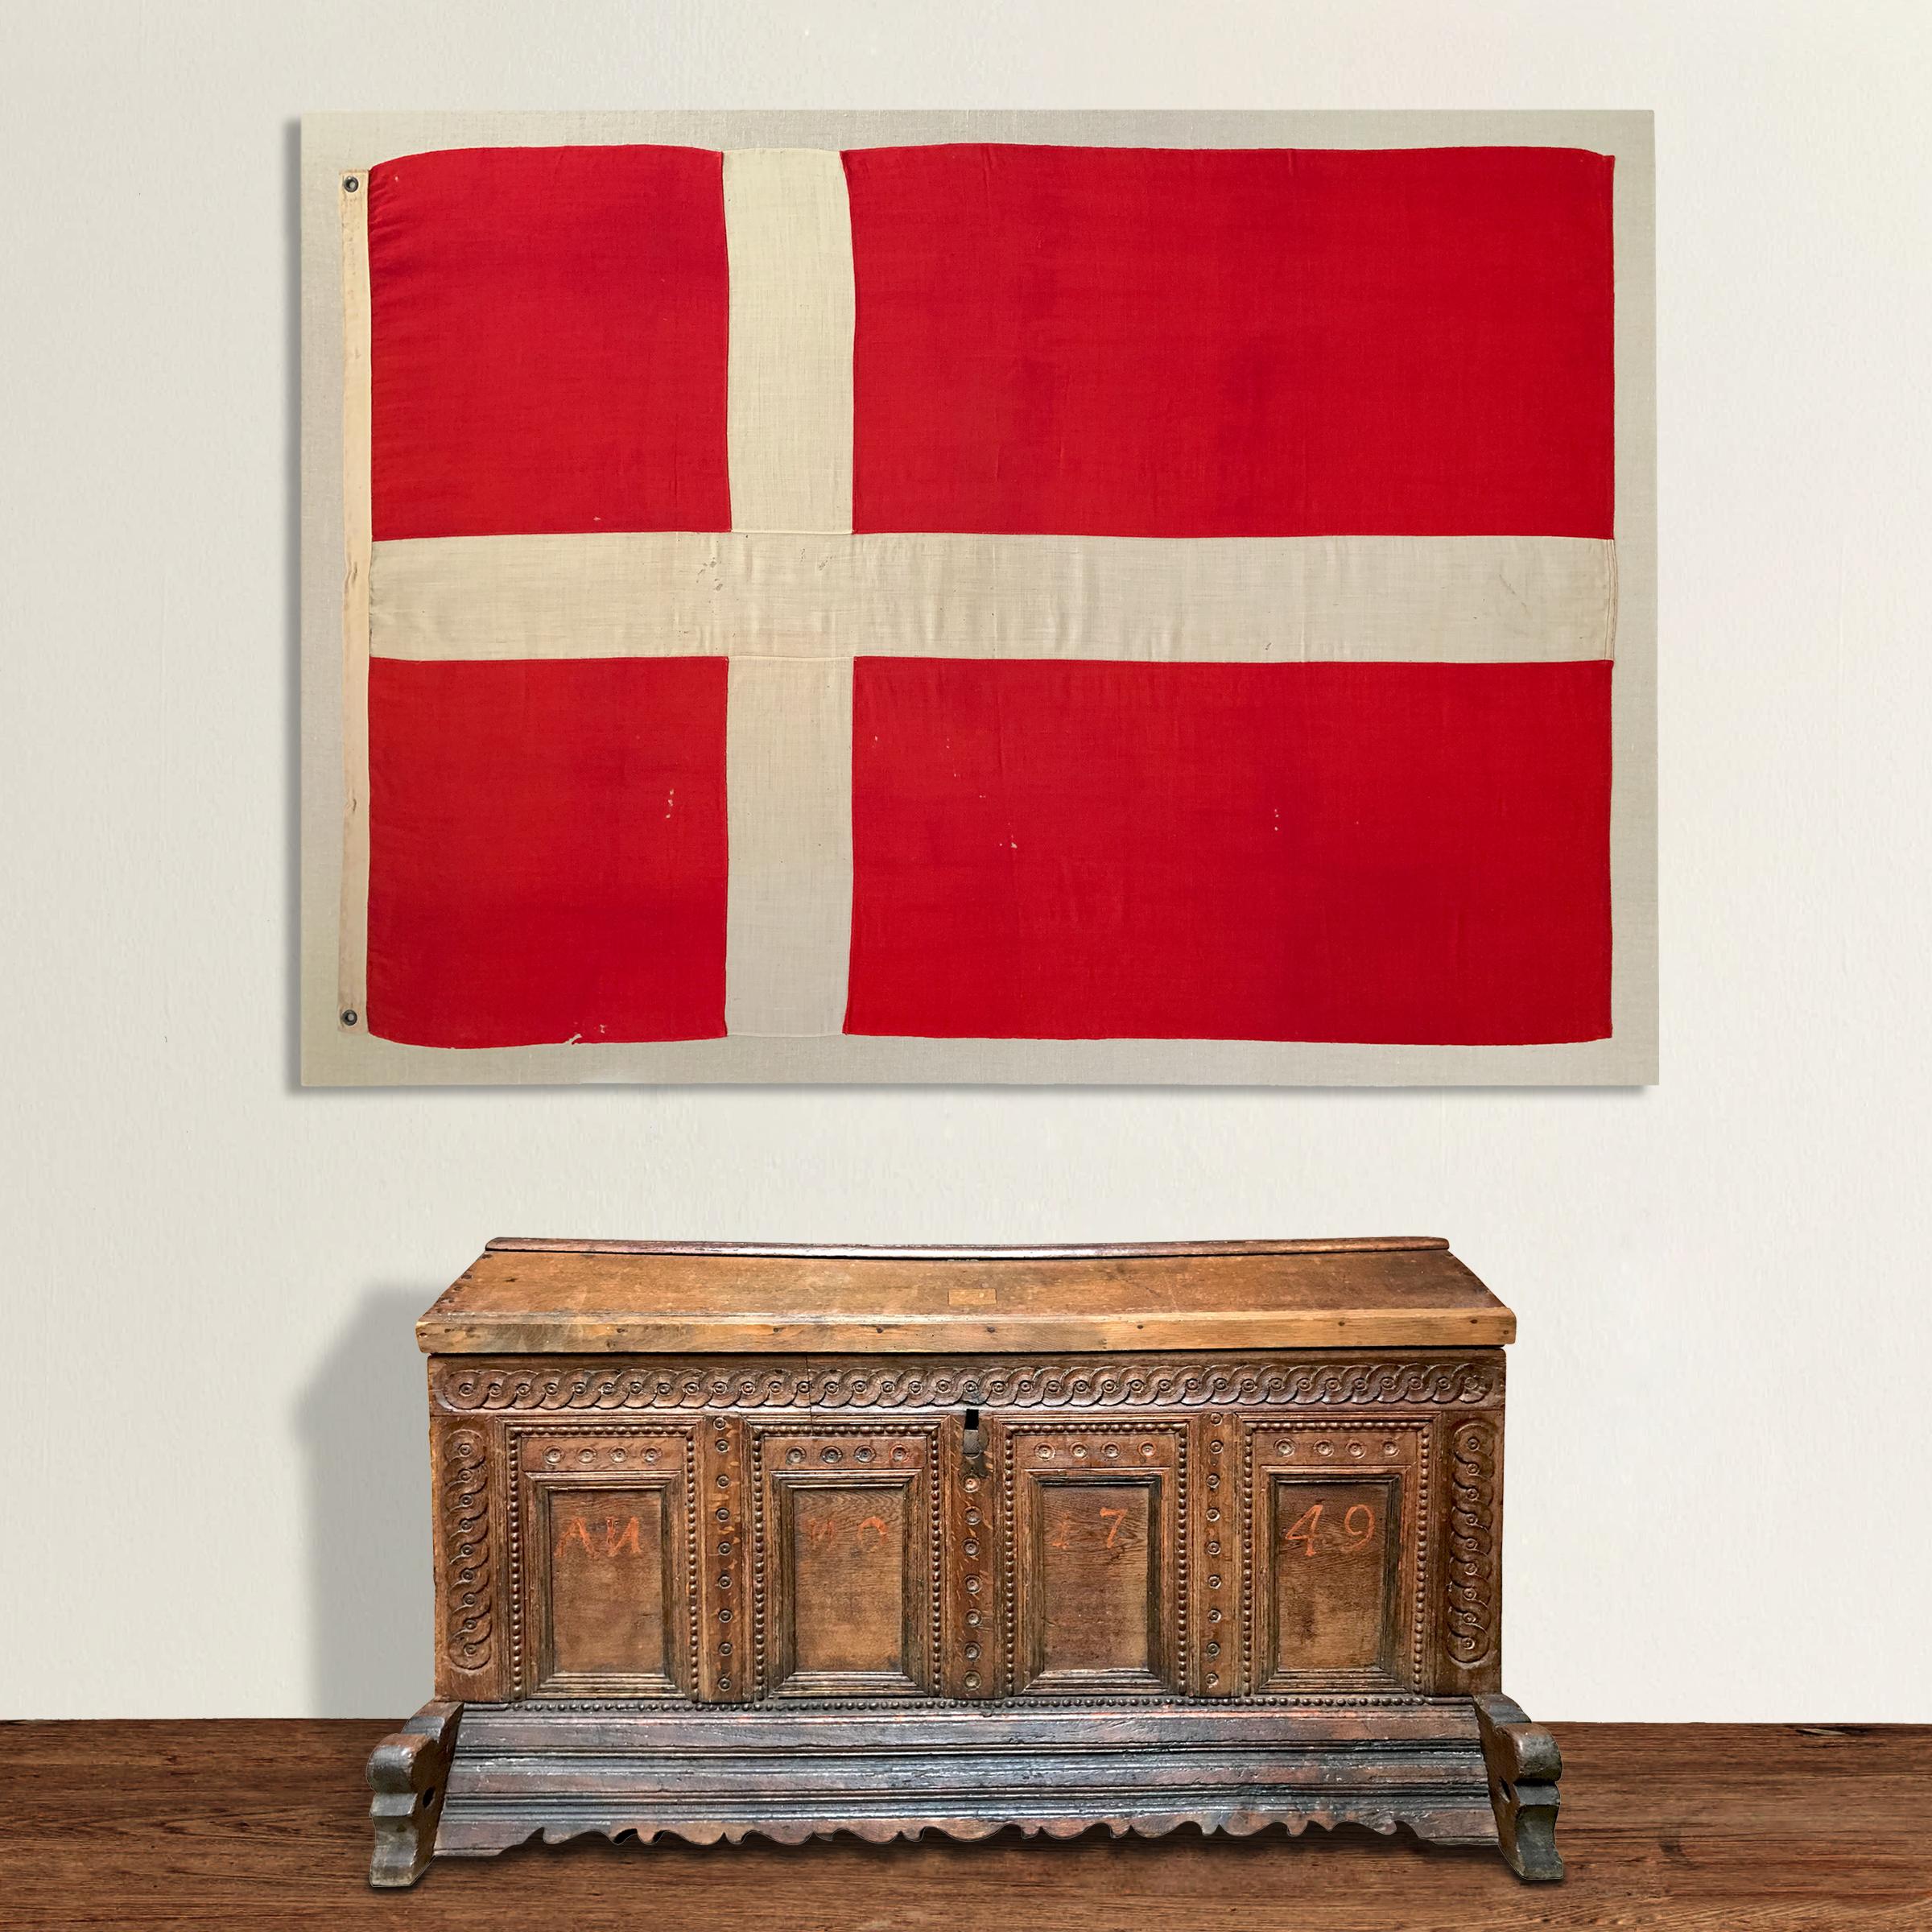 A bold early 20th century handwoven linen Danish flag, custom mounted on a Belgian linen stretcher. Can be hung vertically or horizontally.